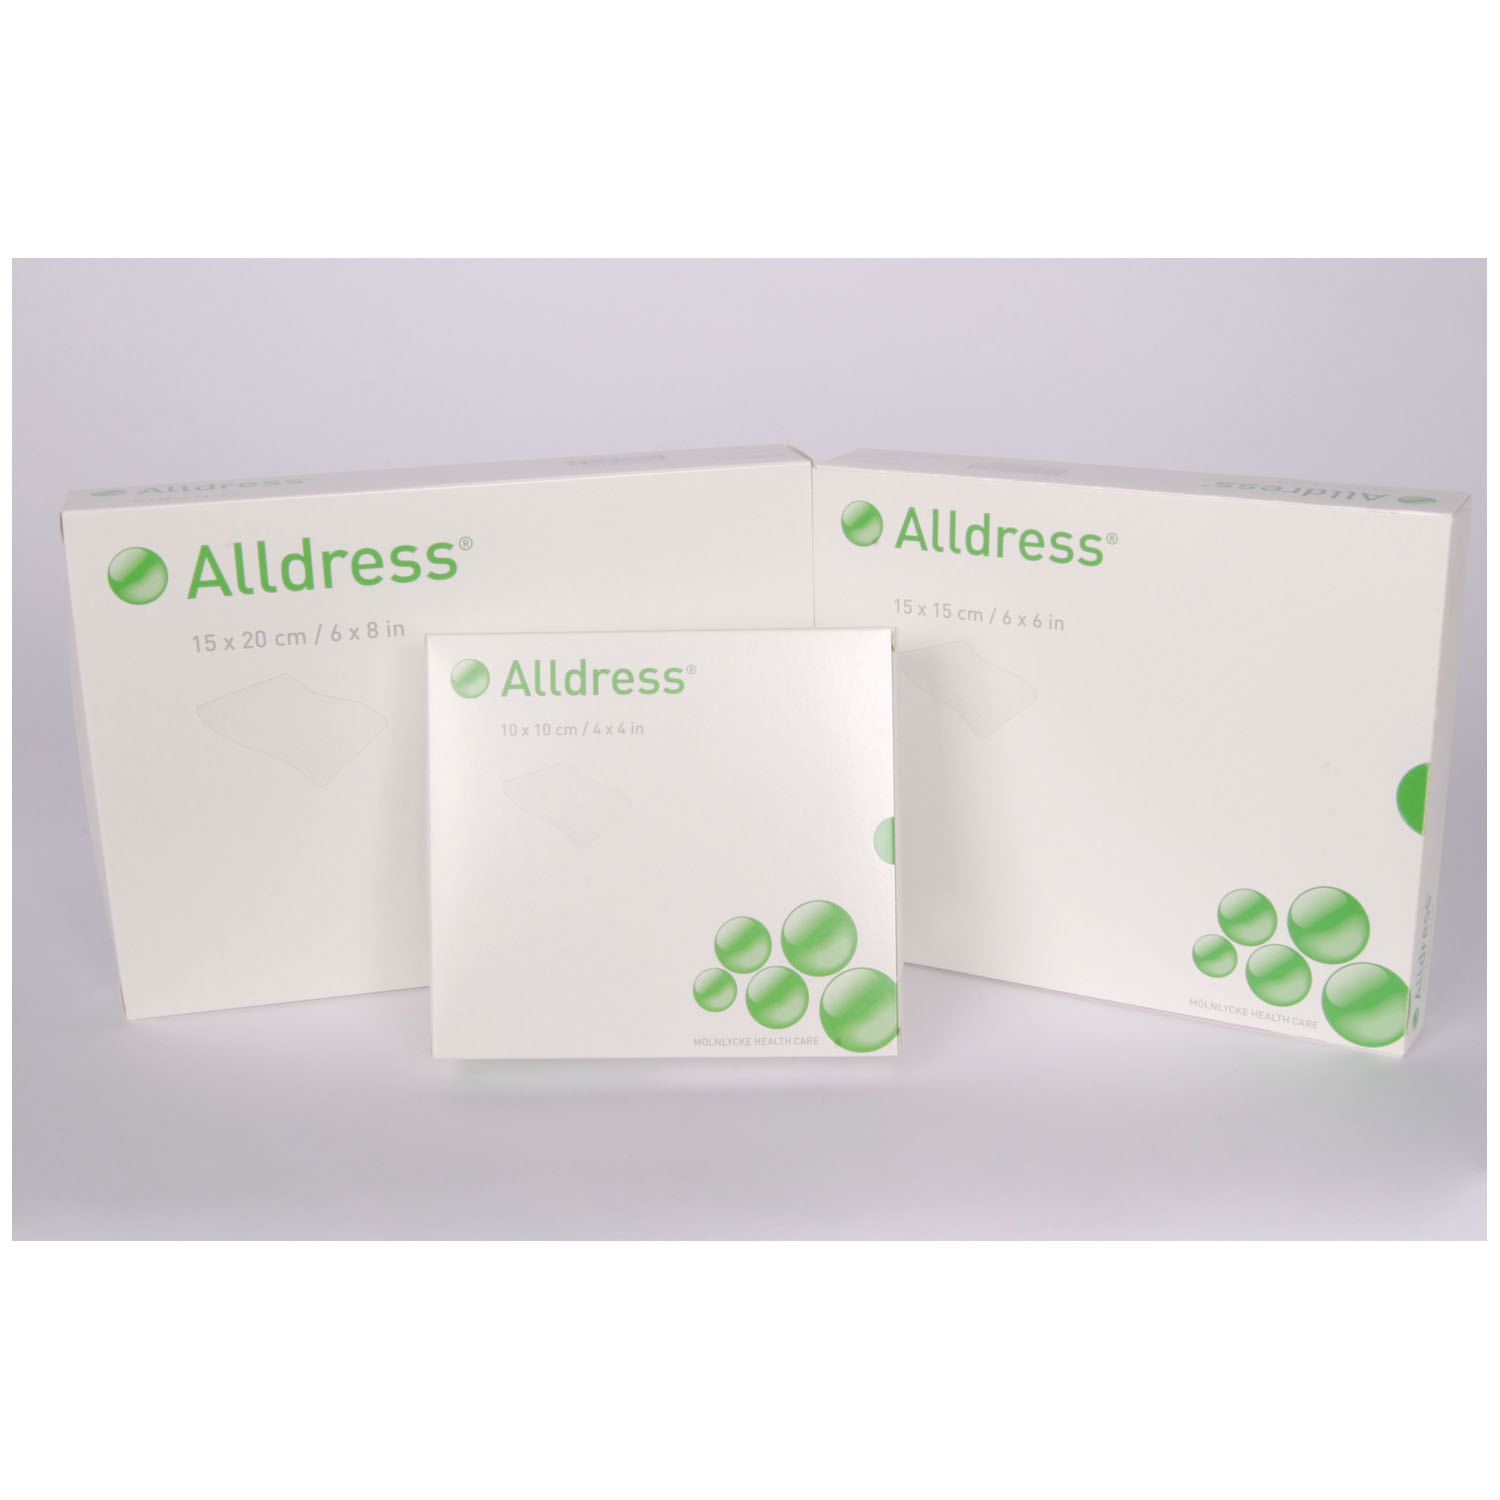 MOLNLYCKE WOUND MANAGEMENT - ALLDRESS : 265329 BX $25.24 Stocked